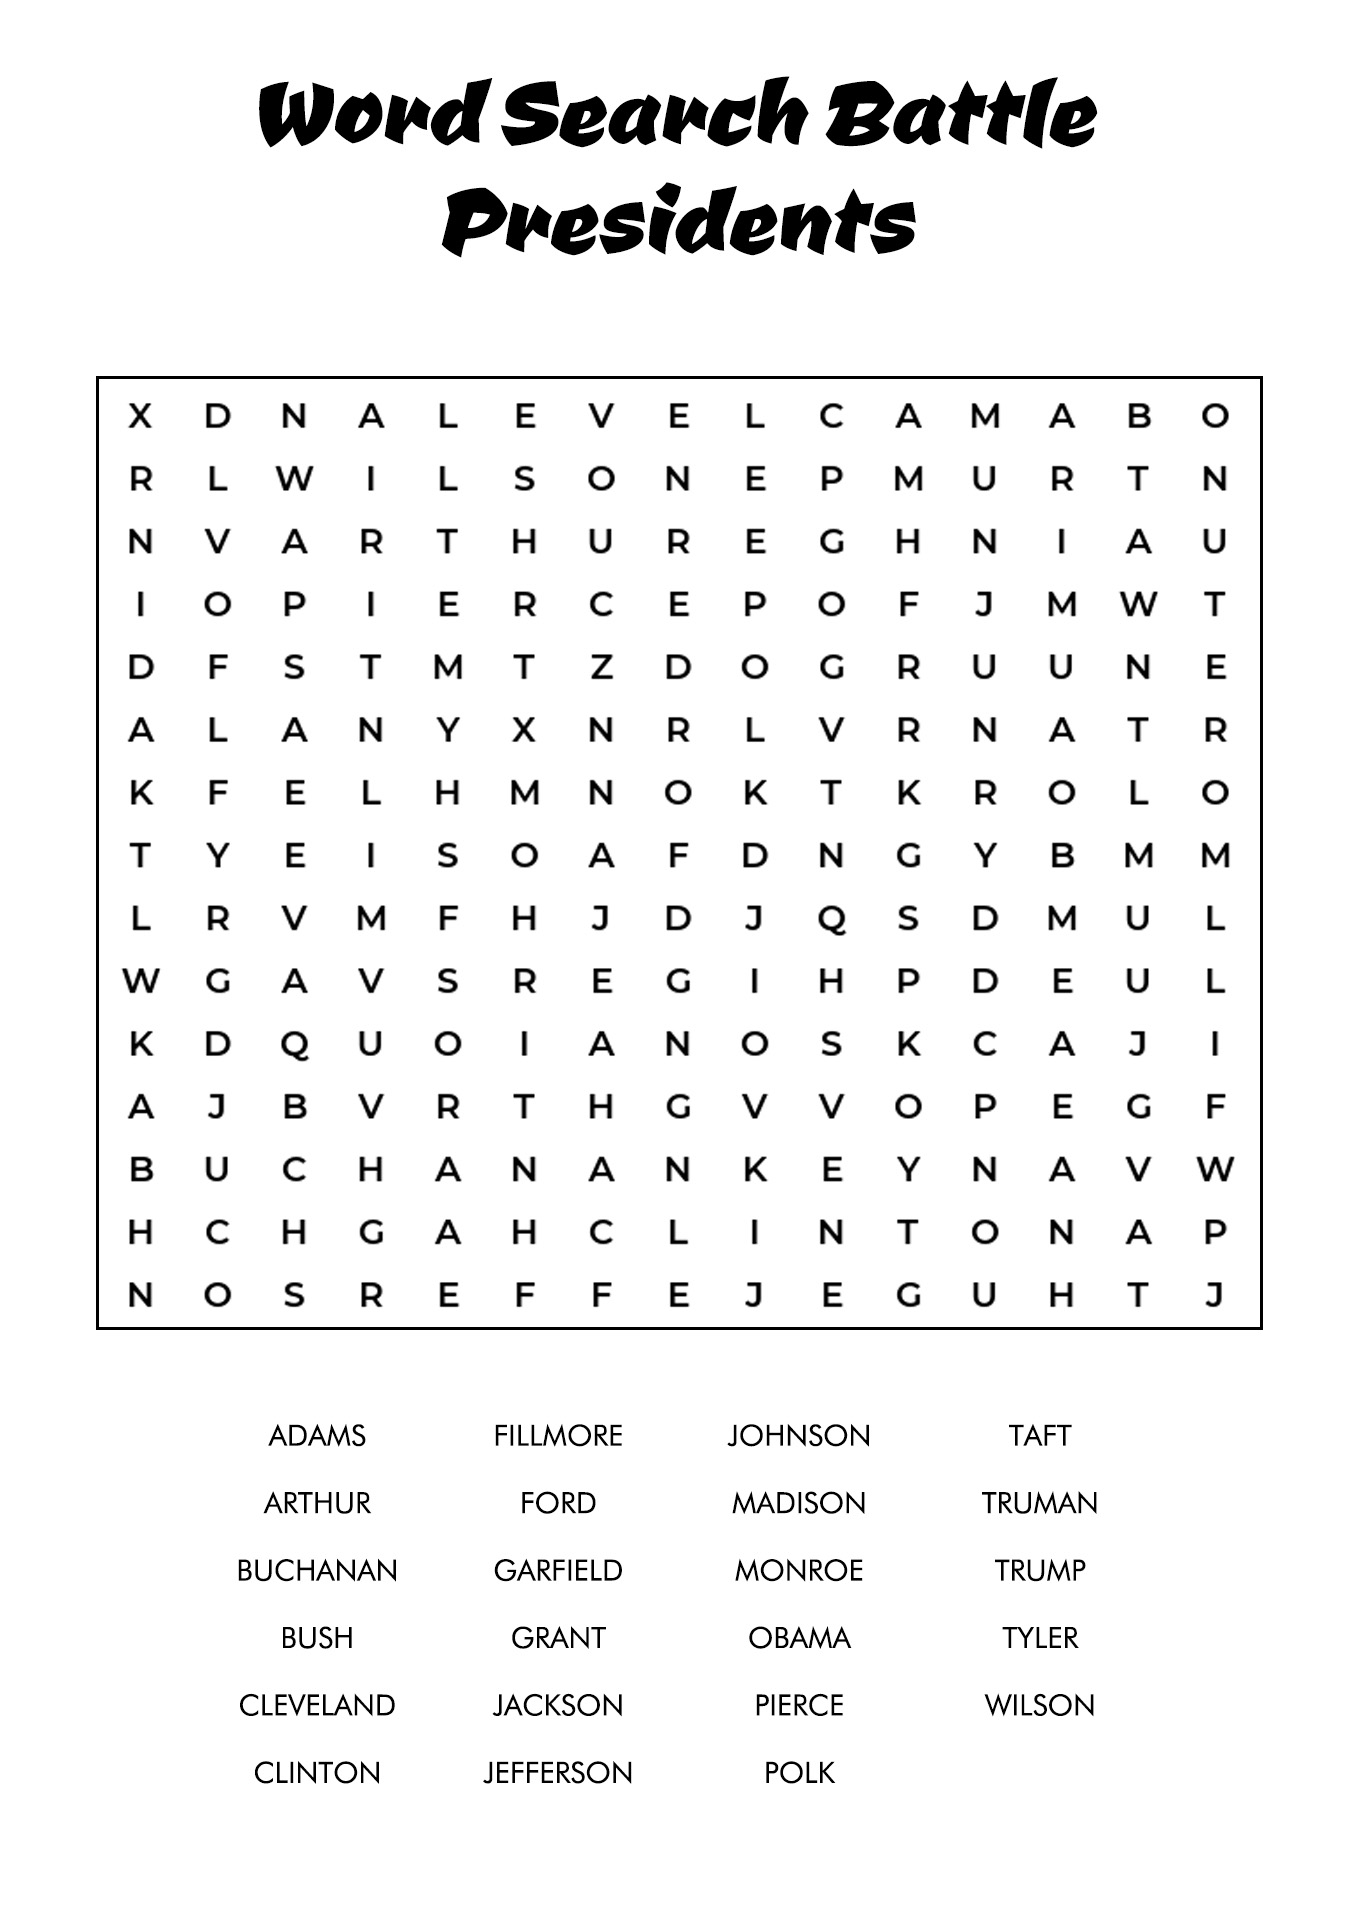 10 Best Images of Adult Word Search Puzzles Worksheets - Difficult